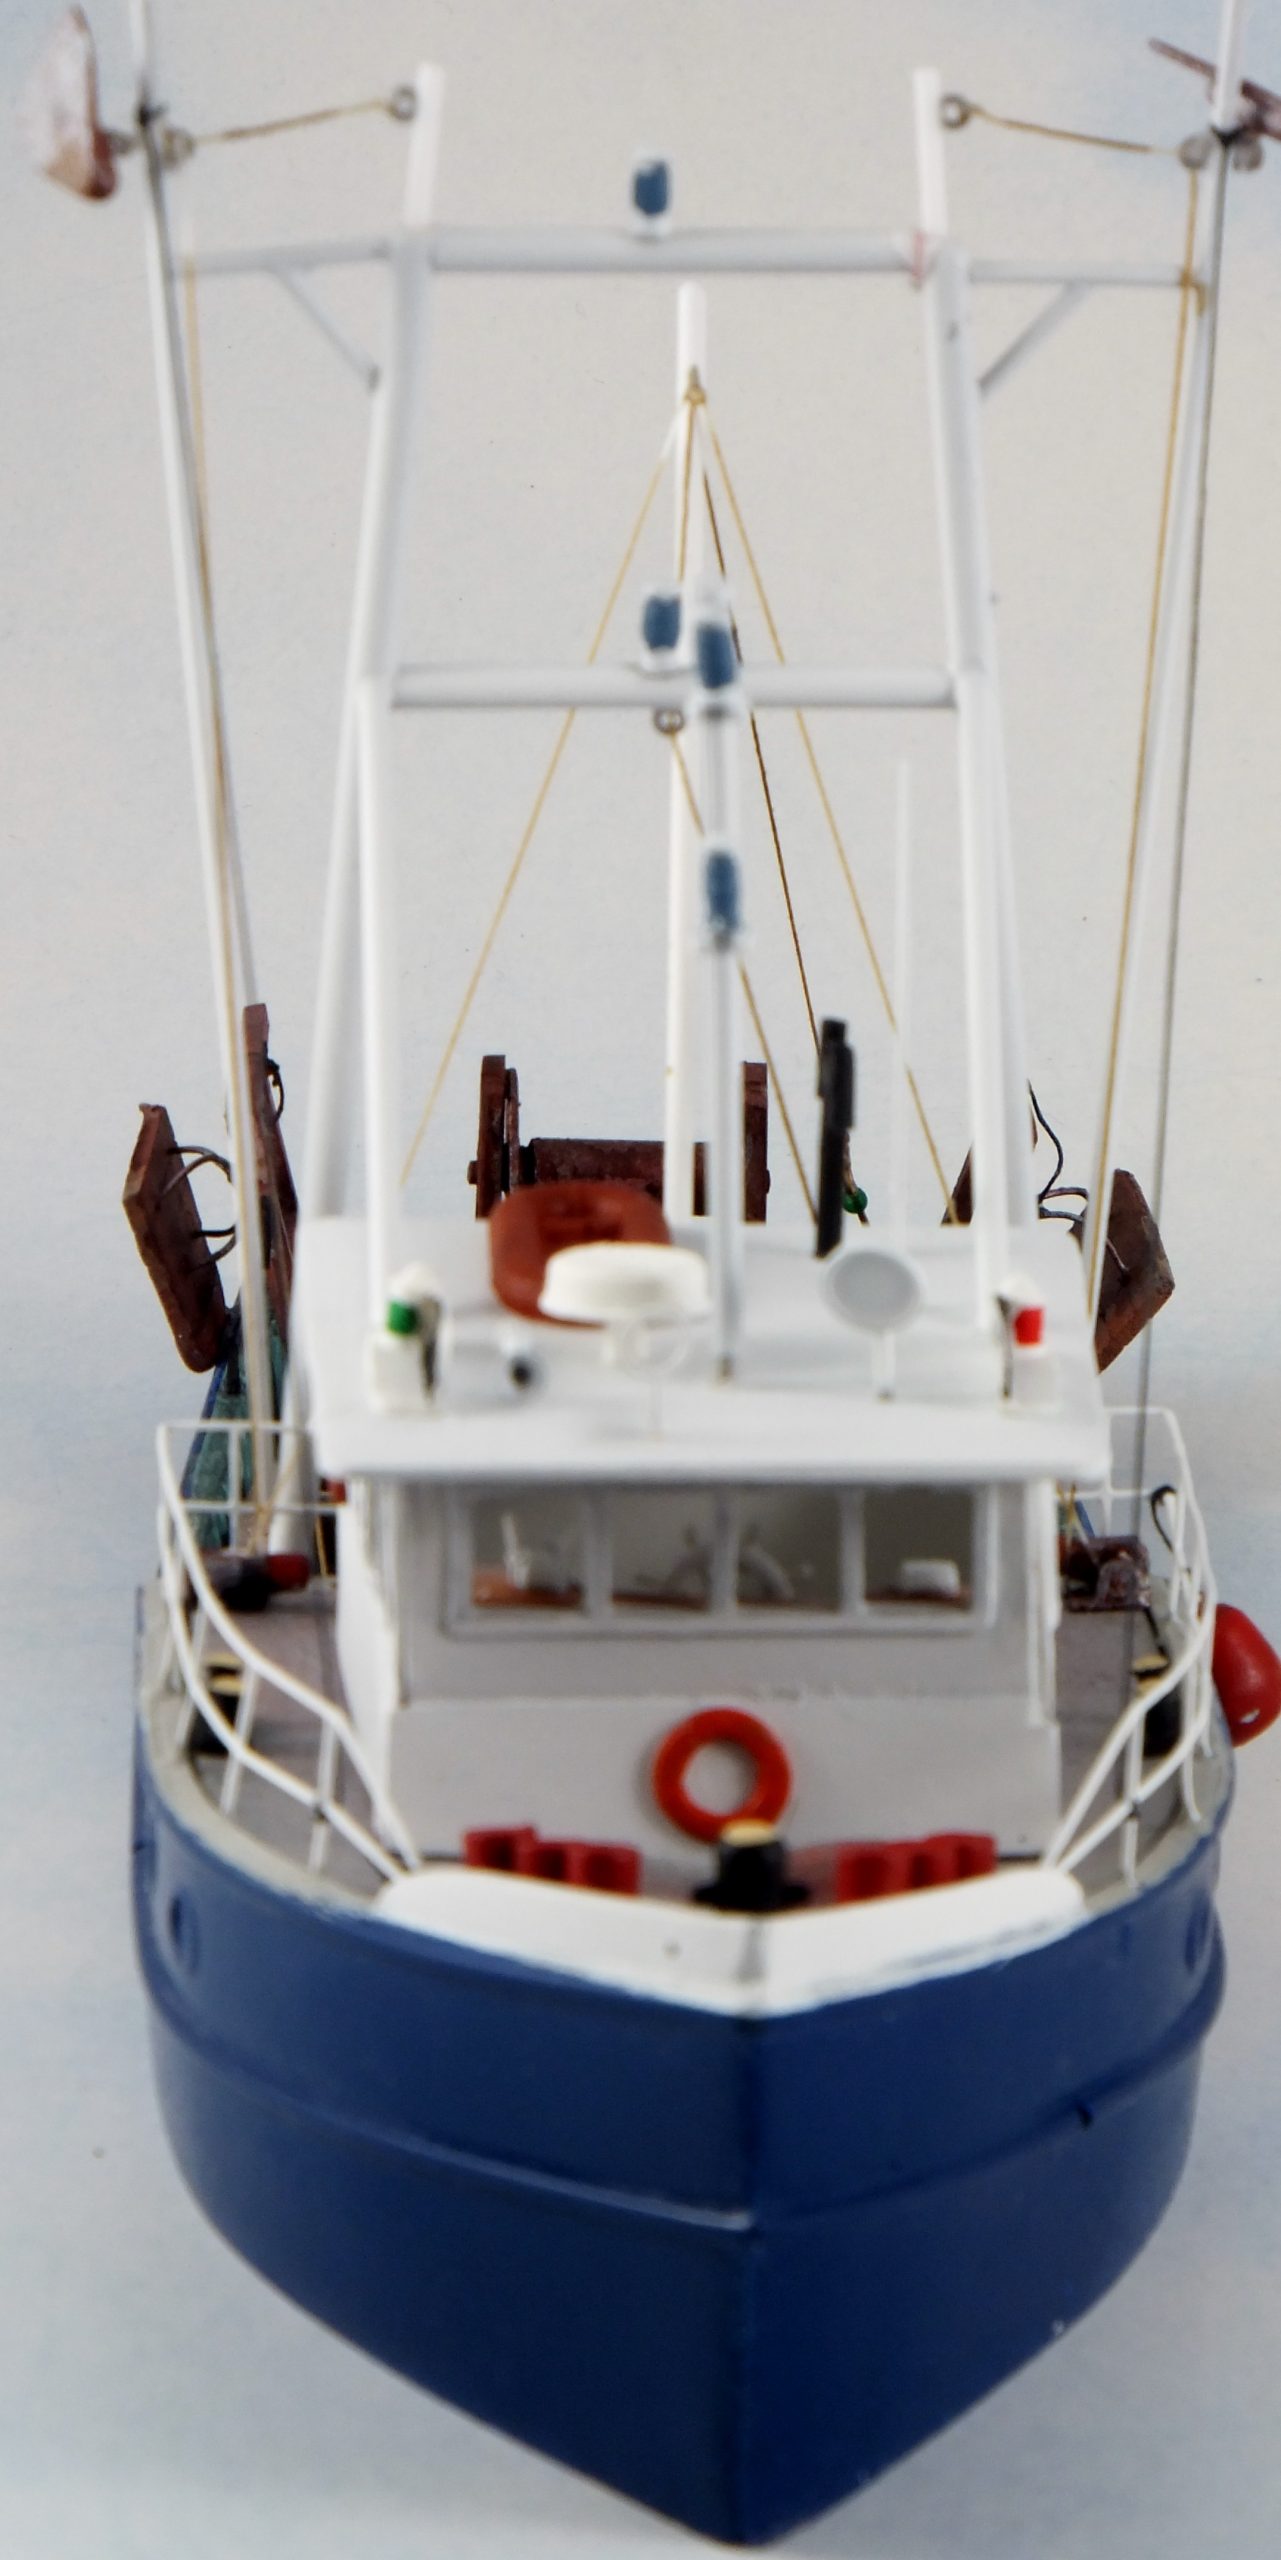 https://seaportmodelworks.com/wp-content/uploads/2019/01/Web-3-H160-HO-people-fig-sold-sep-scaled.jpg